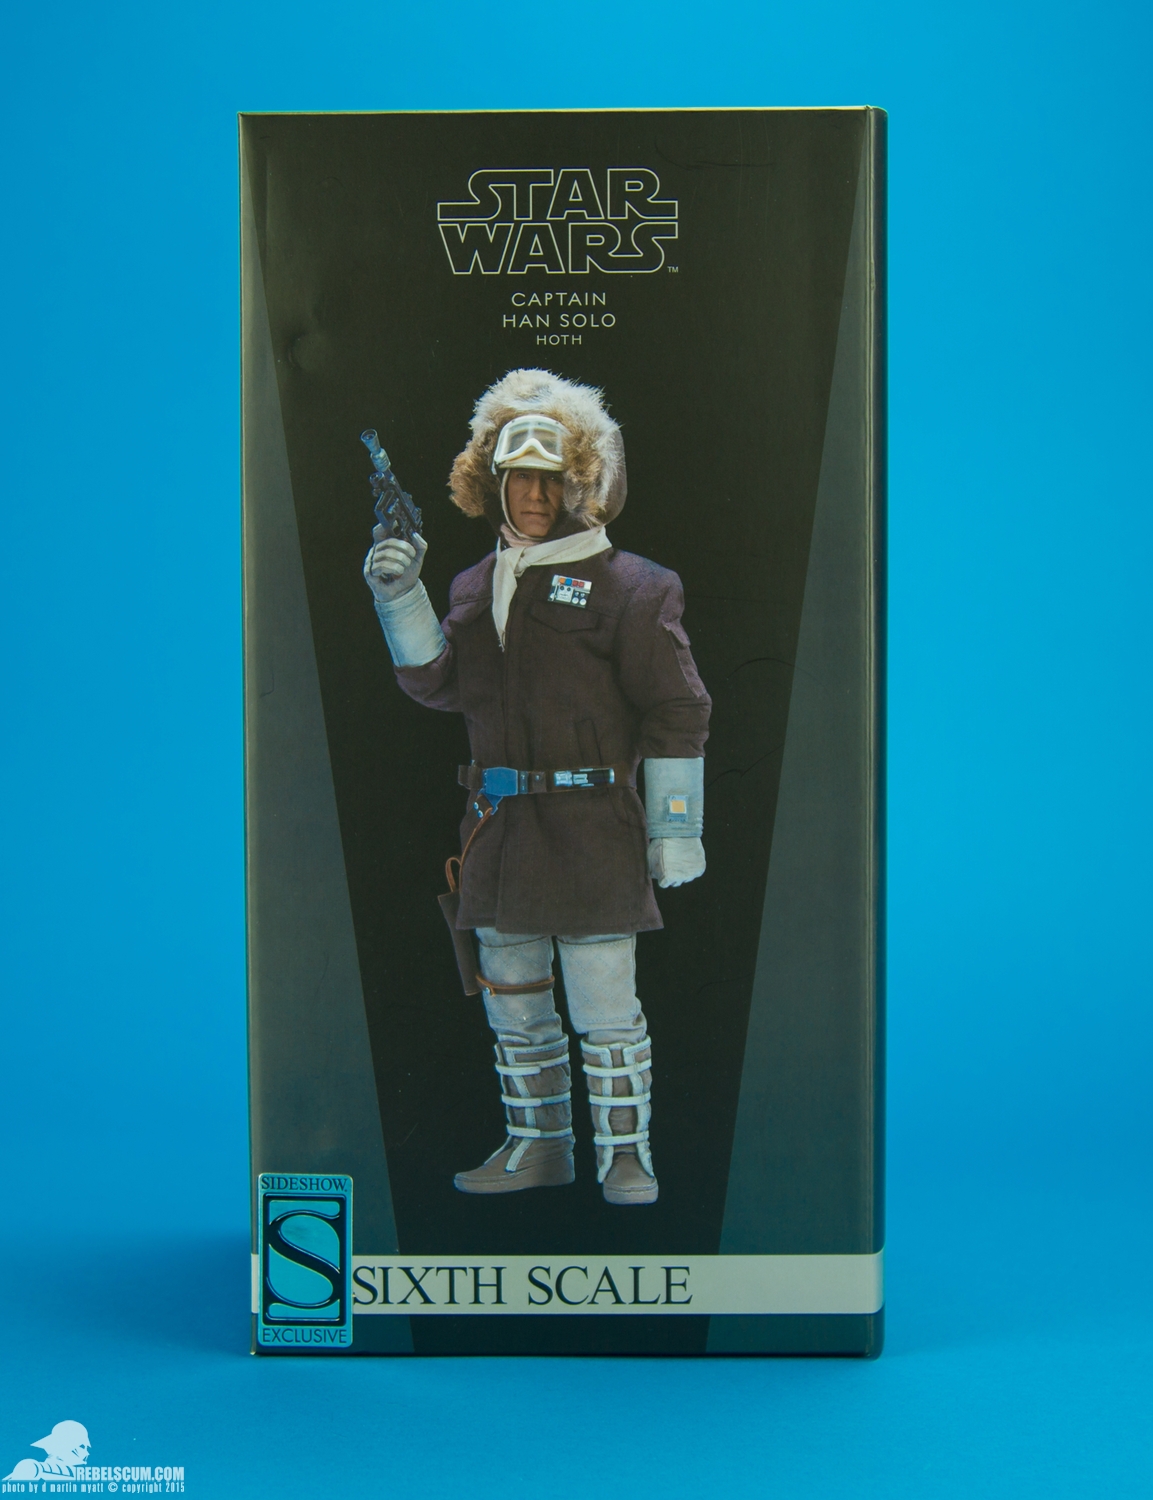 Han-Solo-Hoth-Brown-Sixth-Scale-Sideshow-Collectibles-Star-Wars-034.jpg